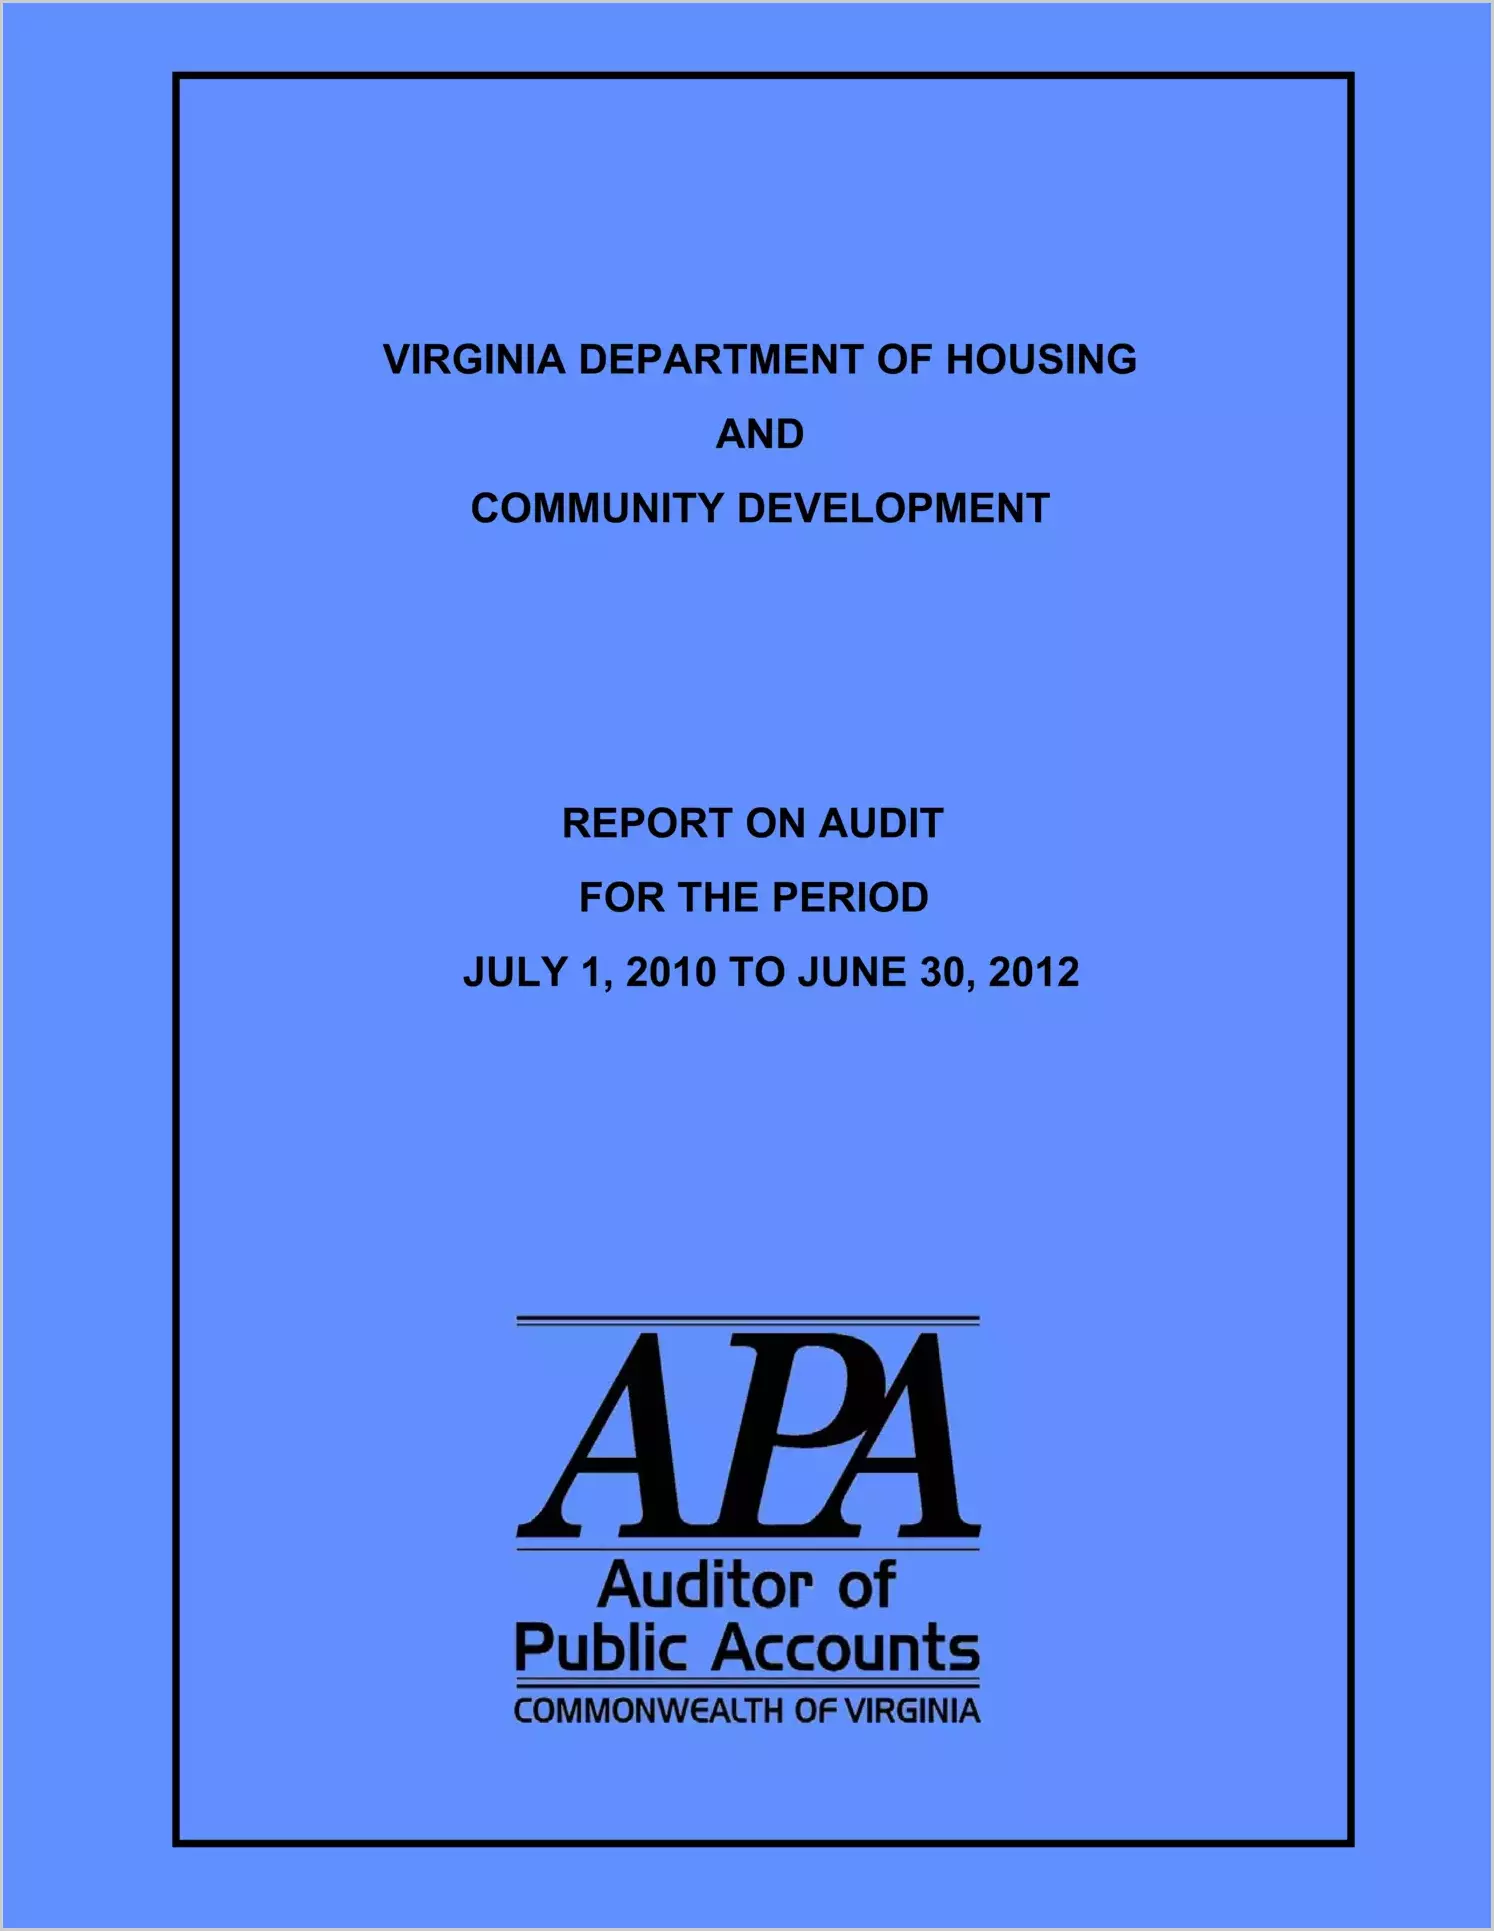 Department of Housing and Community Development report on audit for the period July 1, 2010 through June 30, 2012